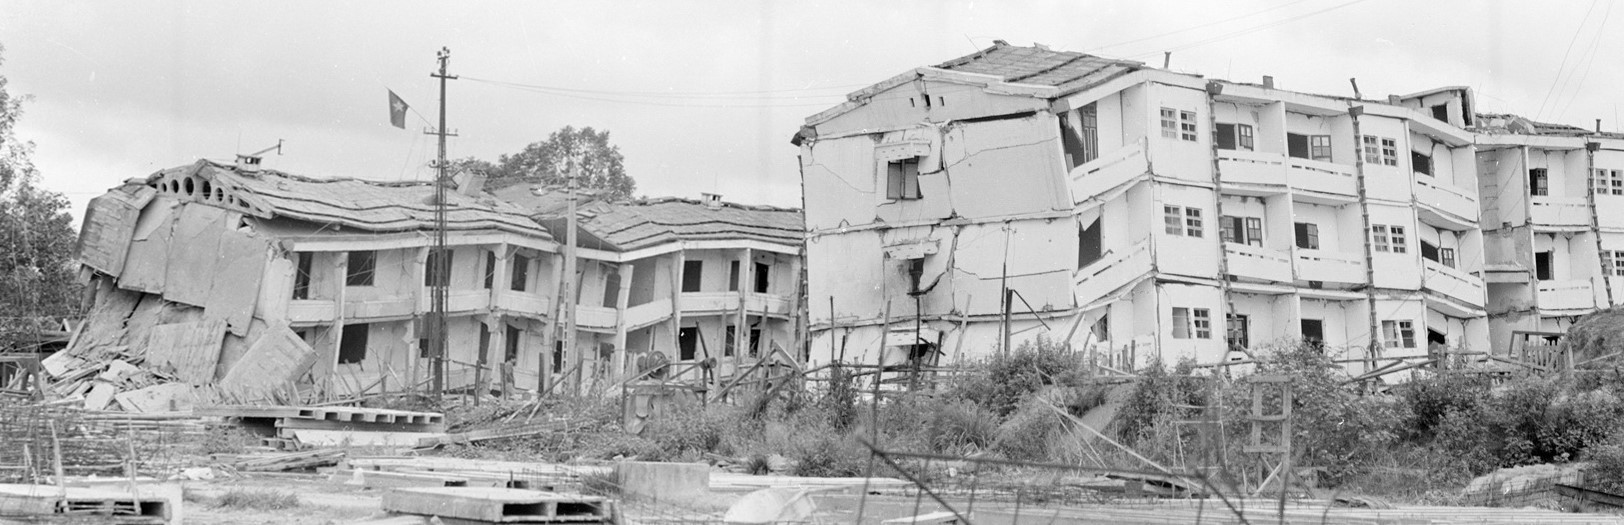 A four-storey pre-fabricated dormitory of workers in Lao Cai town, Hoang Lien Son (now Lao Cai province) was destroyed with explosive by the enemy. (Photo: VNA)